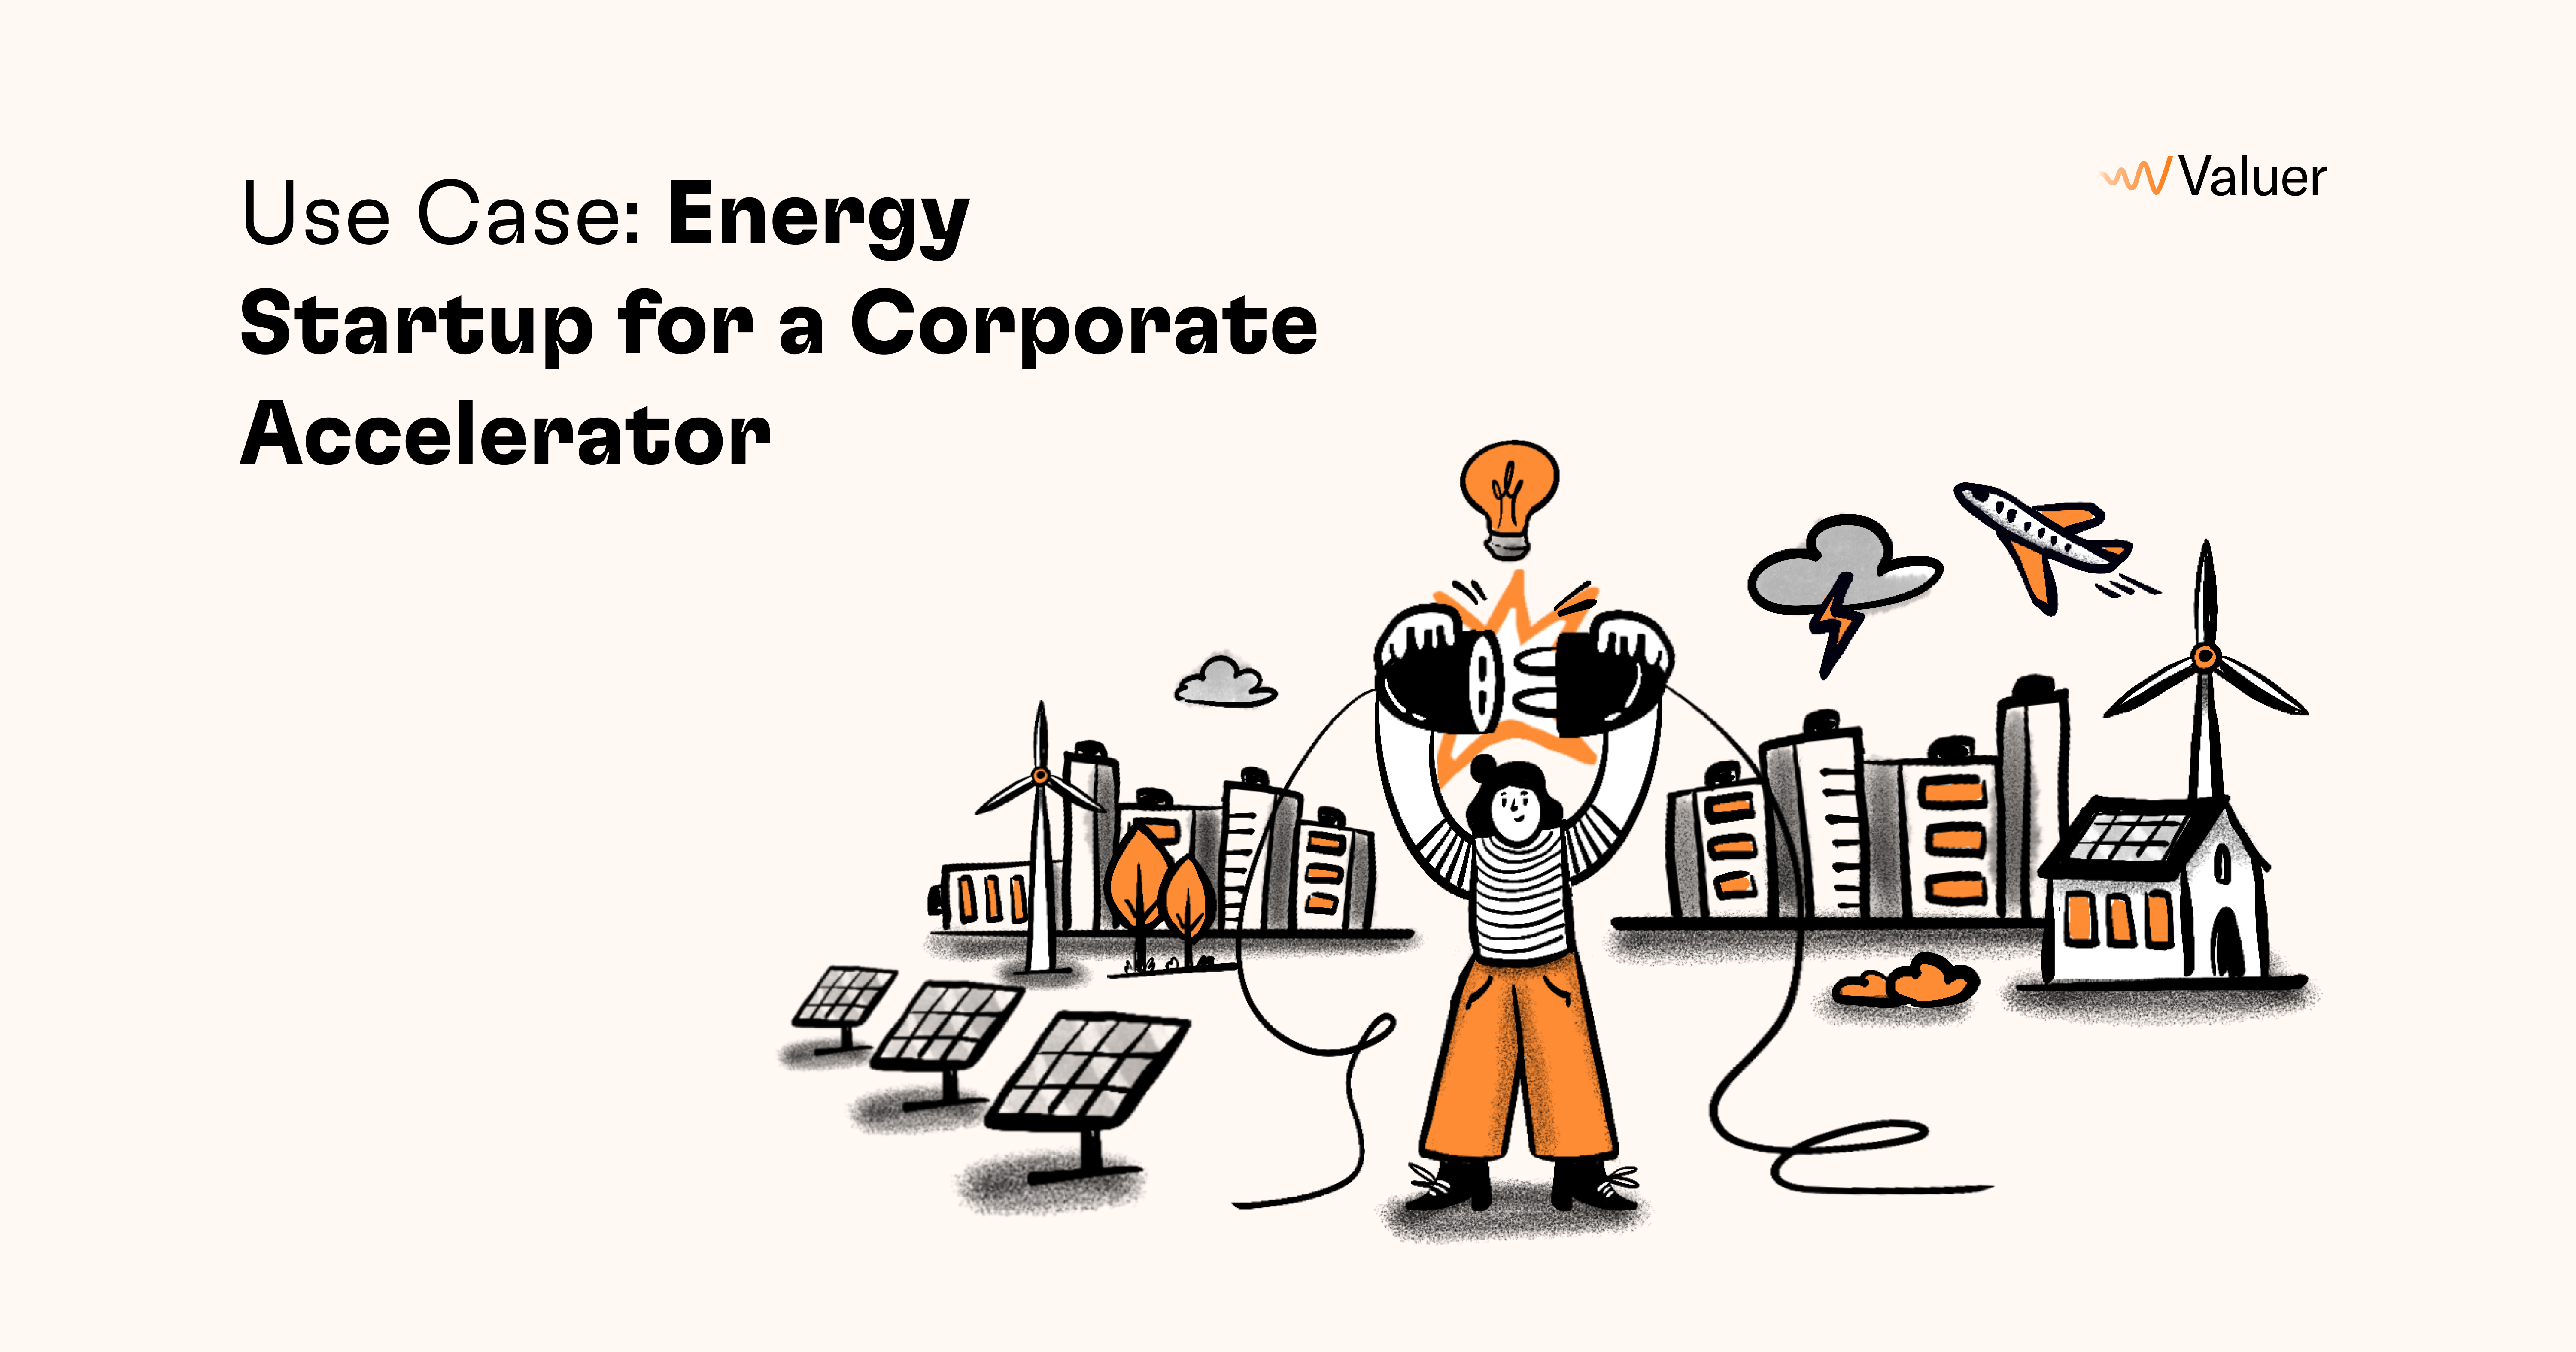 Use Case: Finding Energy Startups for a Corporate Accelerator